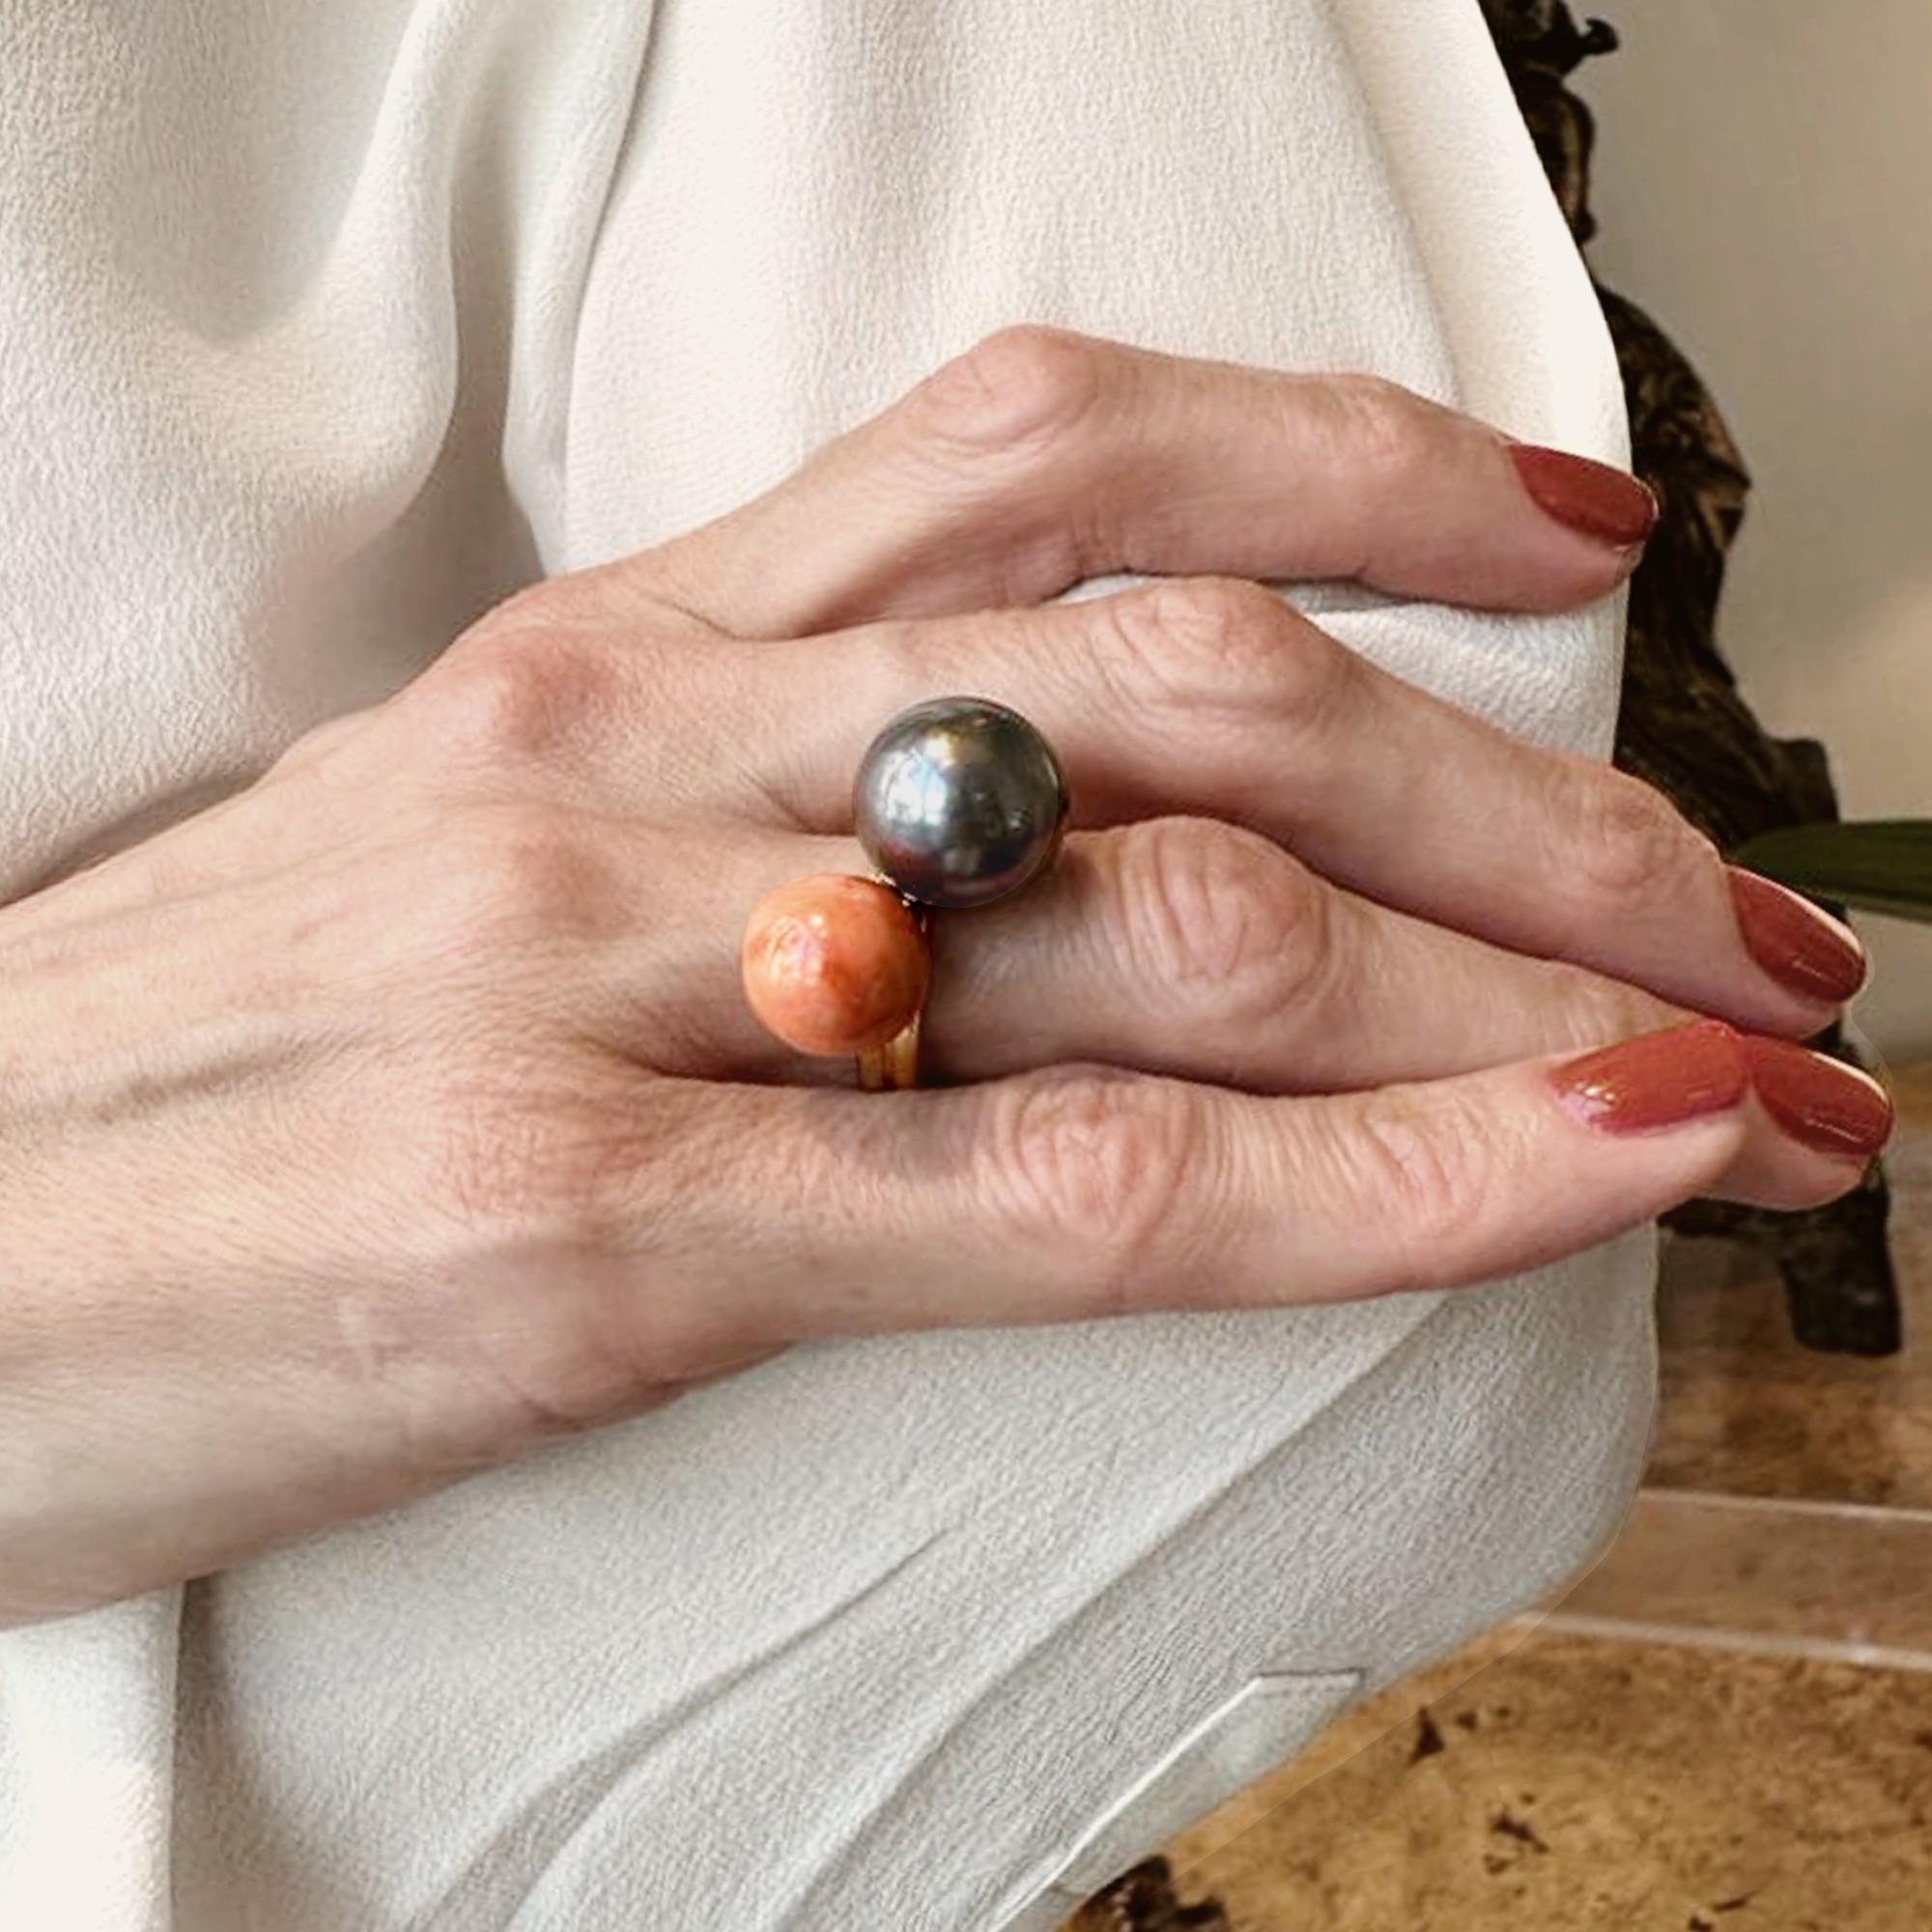 Alex Jona design collection, hand crafted in Italy, 18 carat yellow gold band ring set with one spherical Mediterranean Coral 12.00 mm diameter and one 14.20 mm Tahiti grey. Size 6.0 US, can be sized.
Alex Jona jewels stand out, not only for their